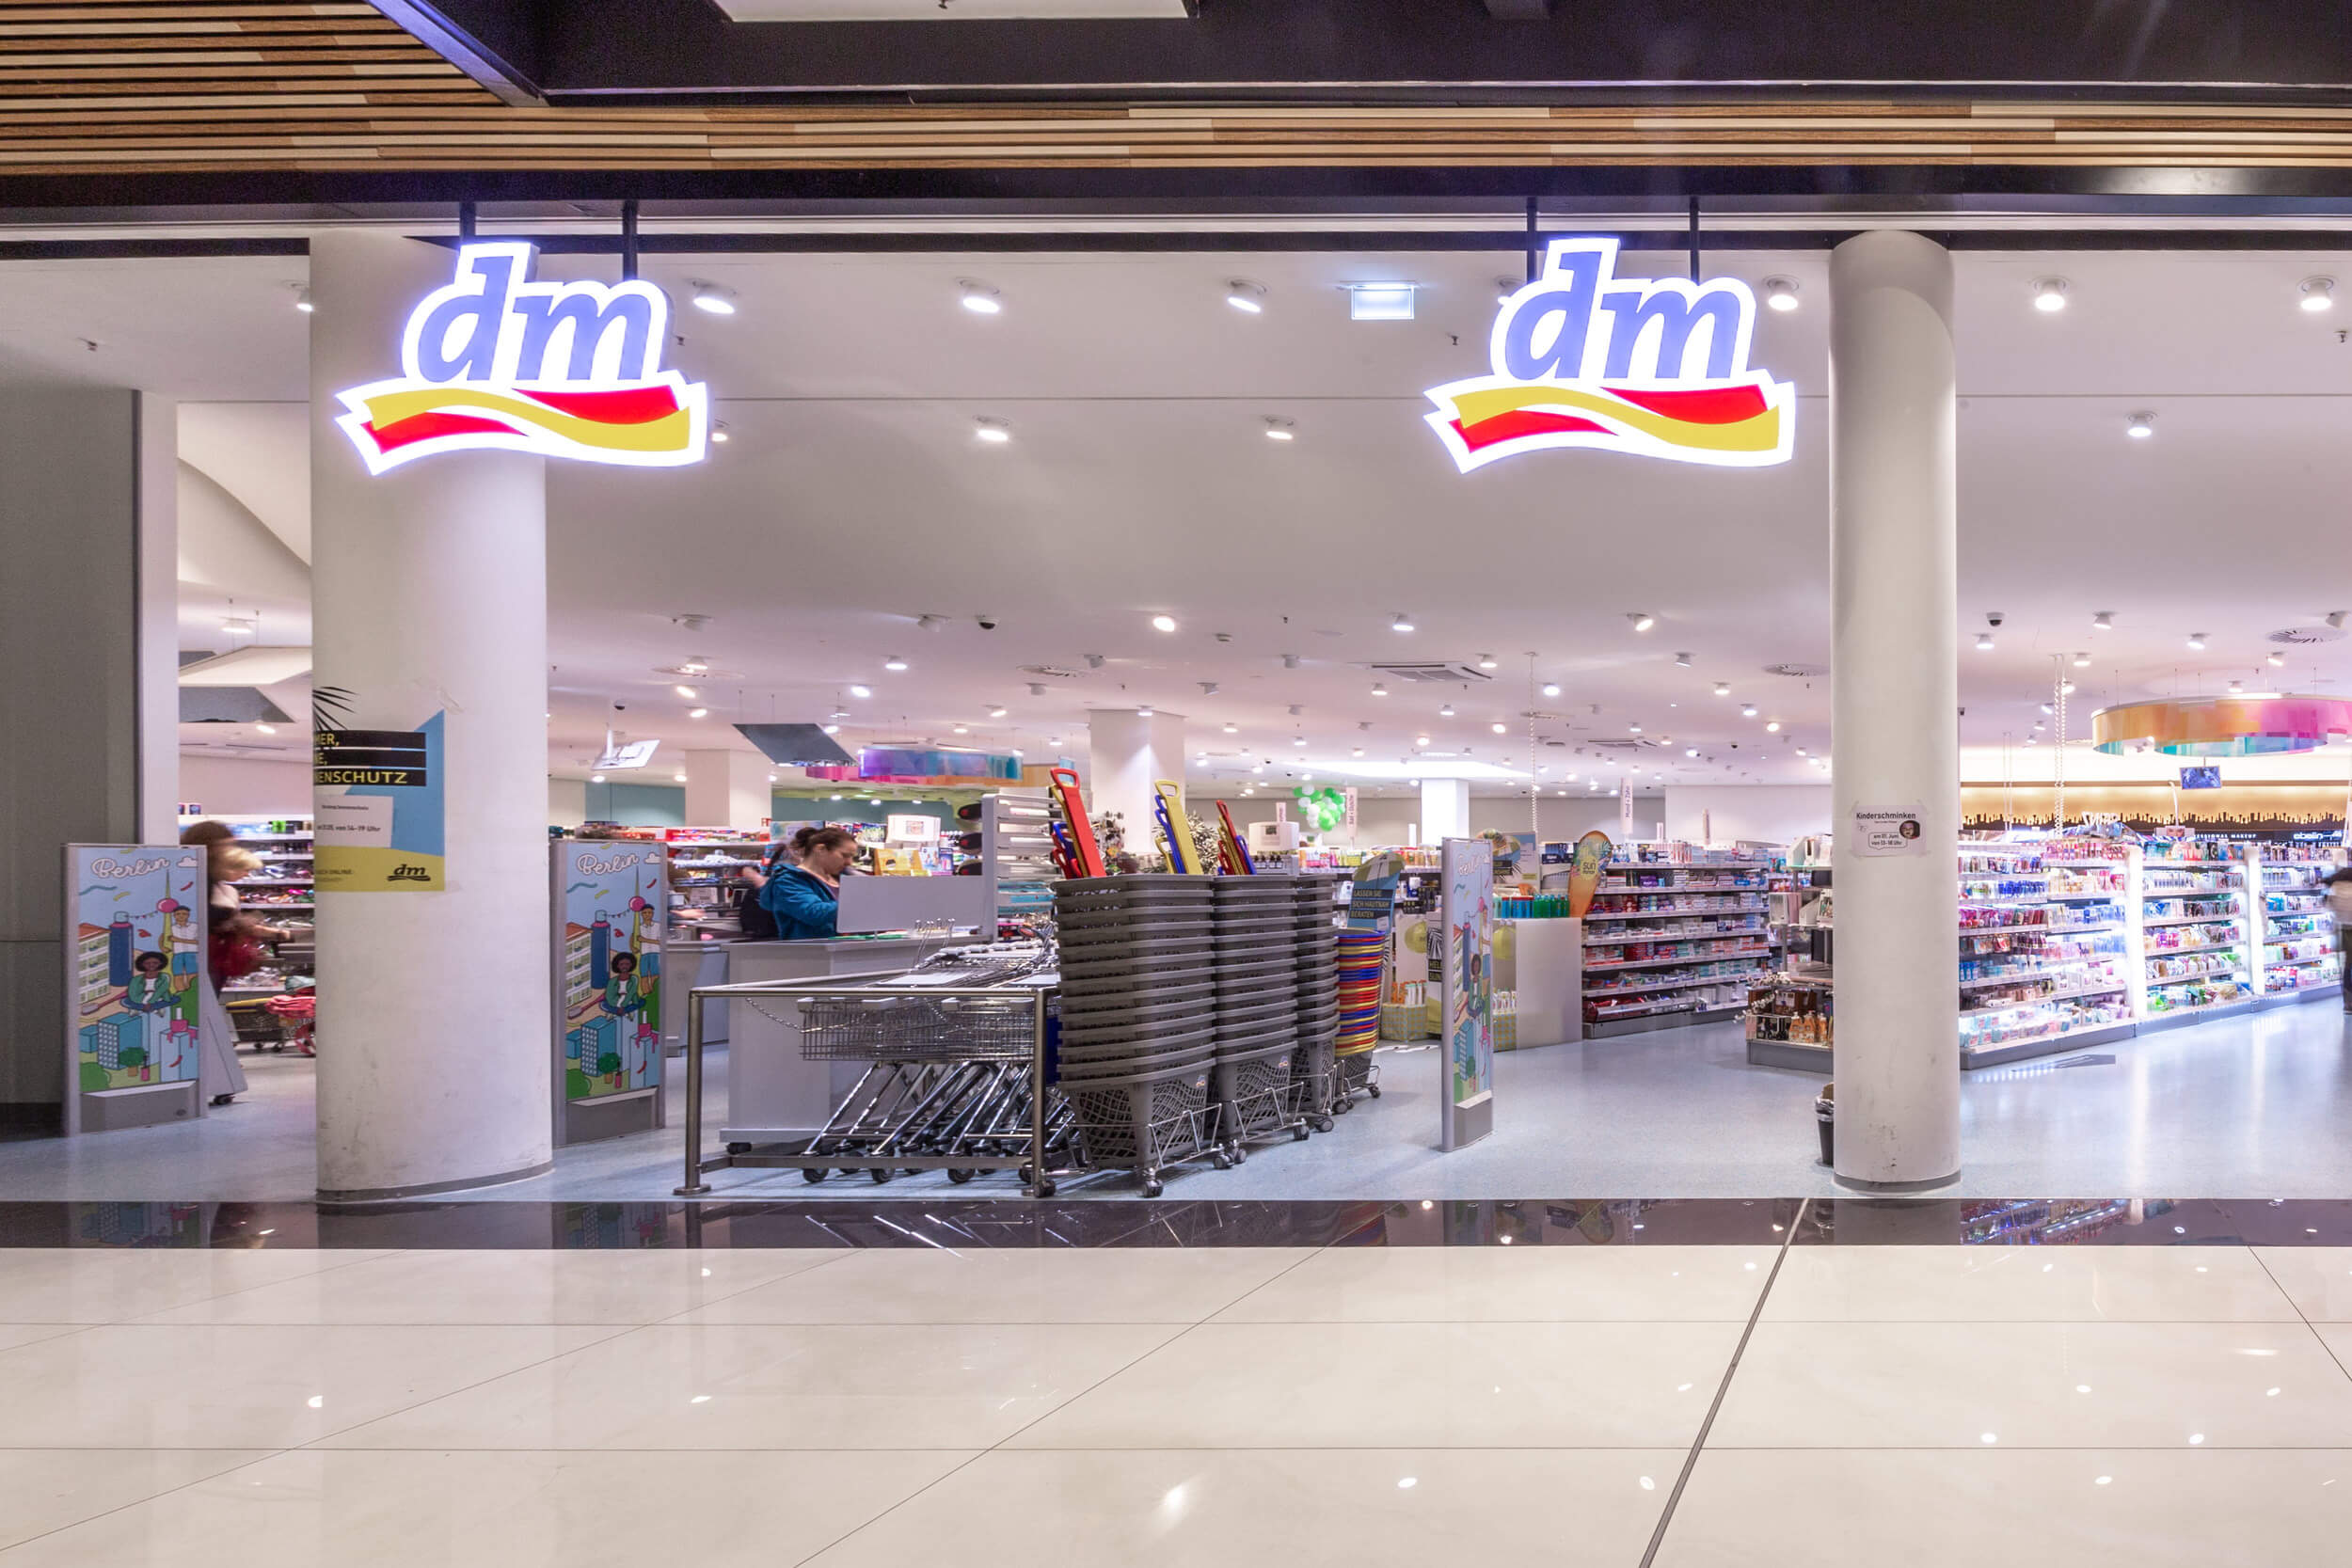 dm at the Mall of Berlin